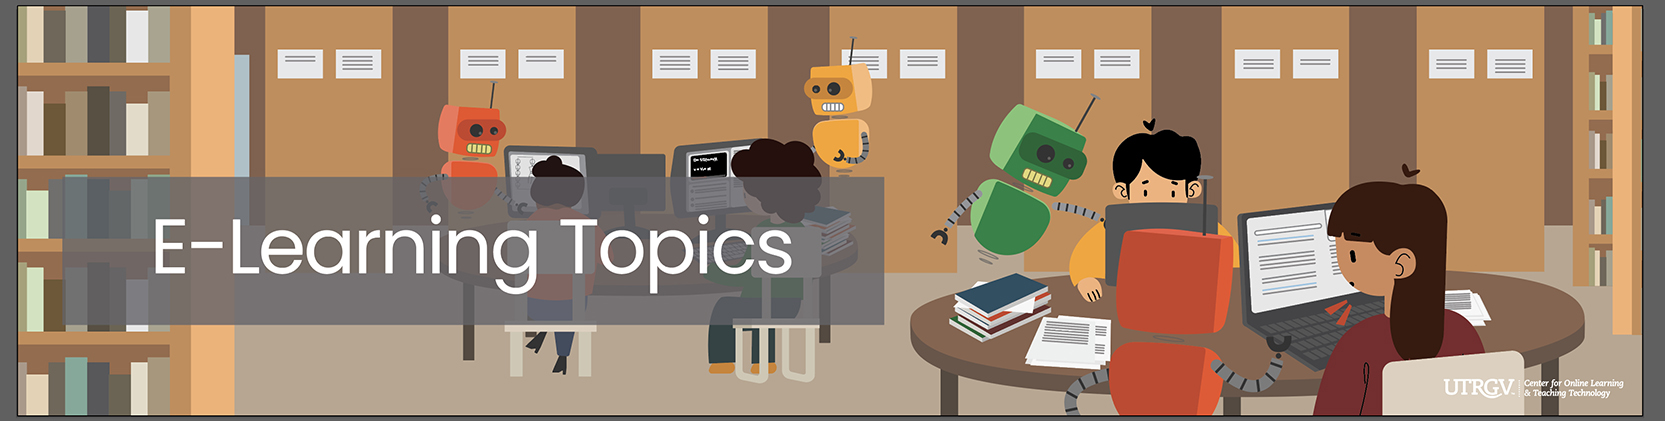 E-Learning Topics Page Banner 